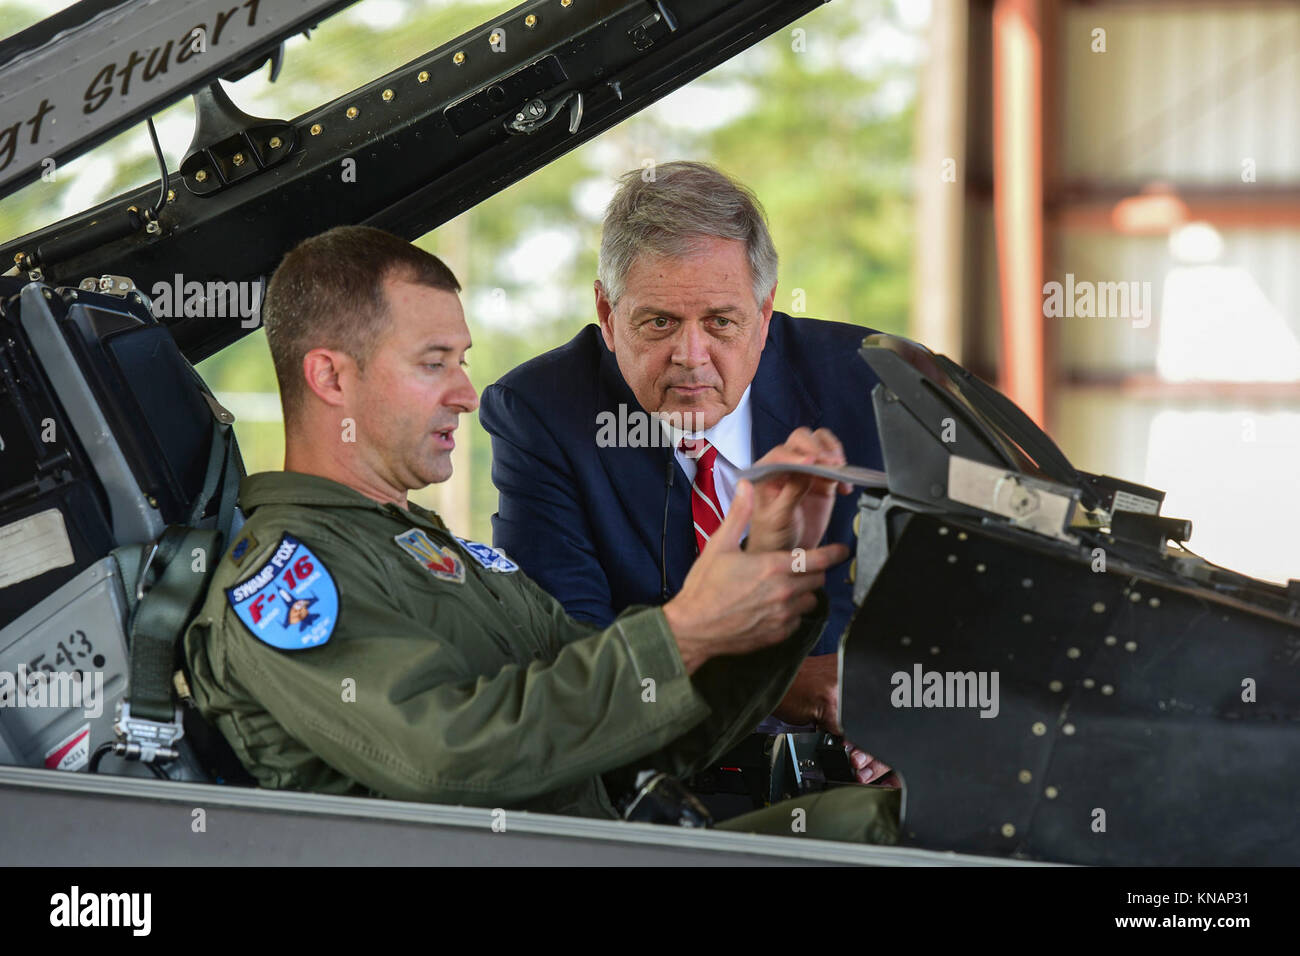 U.S. Air Force Lt. Col. Jeff Beckham, a fighter pilot assigned to the 157th Fighter Squadron, shows U.S. Congressman Ralph Norman, the District 5 representative for the state of South Carolina, the cockpit of an F--16 Fighting Falcon fighter jet during a visit to the South Carolina Air National Guard’s 169th Fighter Wing at McEntire Joint National Guard Base, S.C., Sept. 20, 2017. Norman toured facilities on the base and spoke with leadership about the capabilities of the SCANG. (U.S. Air National Guard Stock Photo